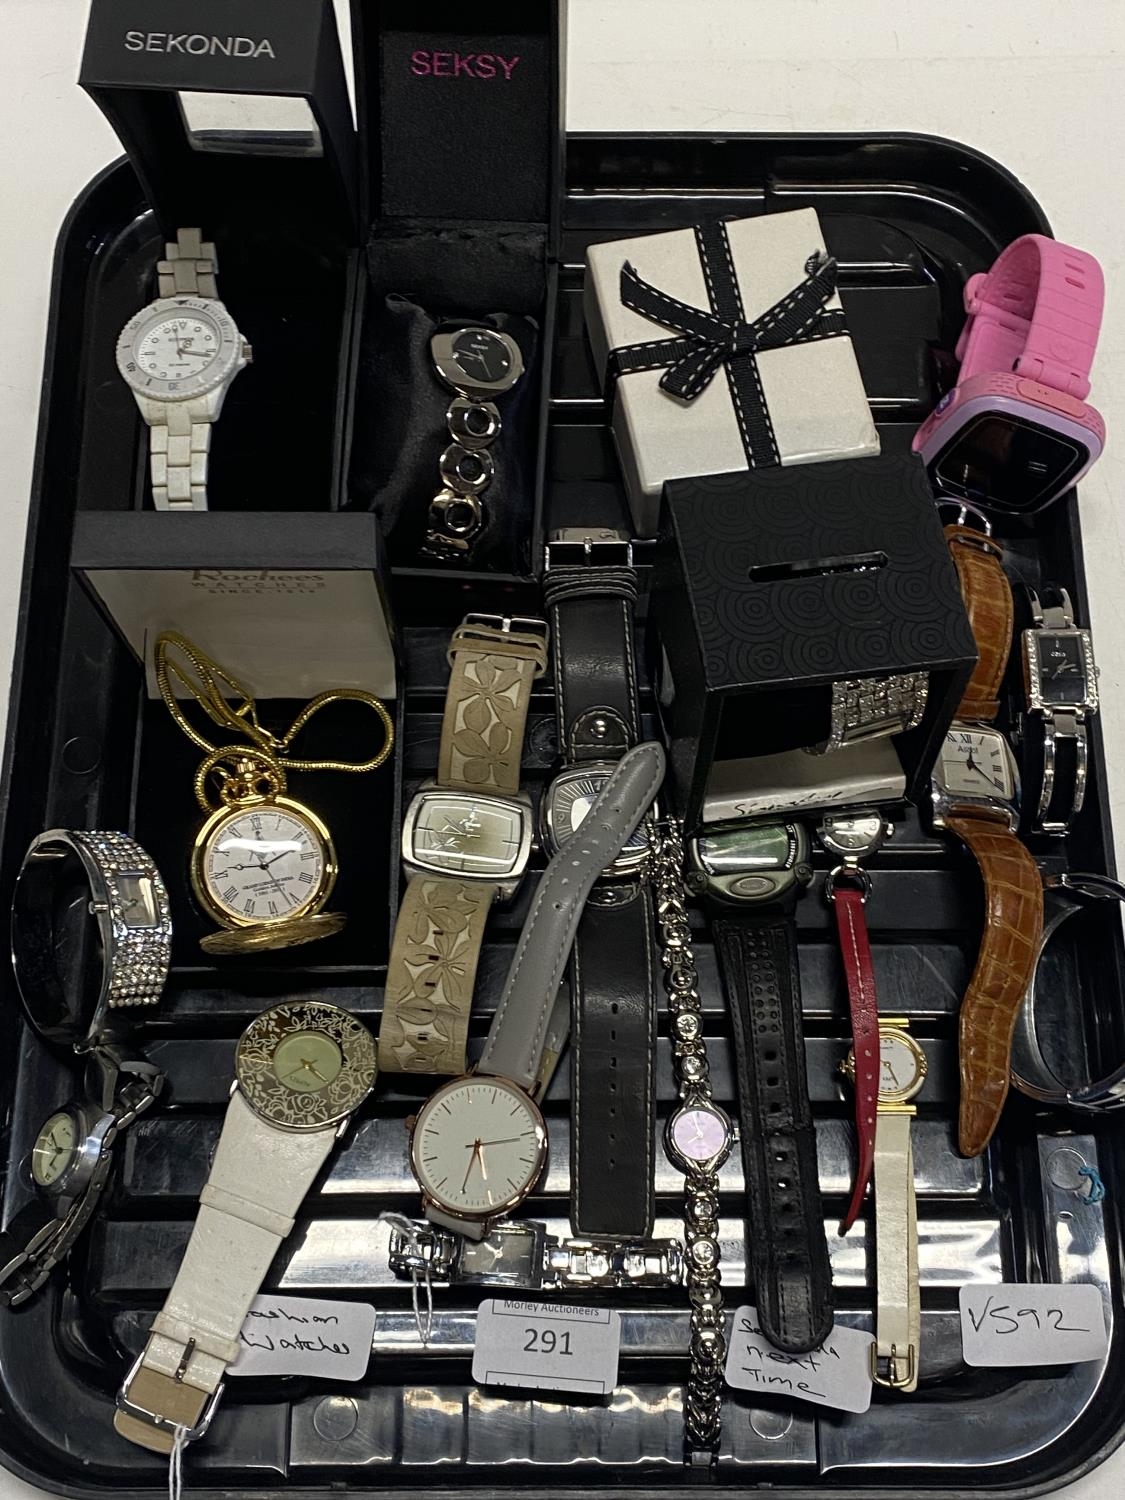 A job lot of assorted dress and fashion watches including Sekonda etc